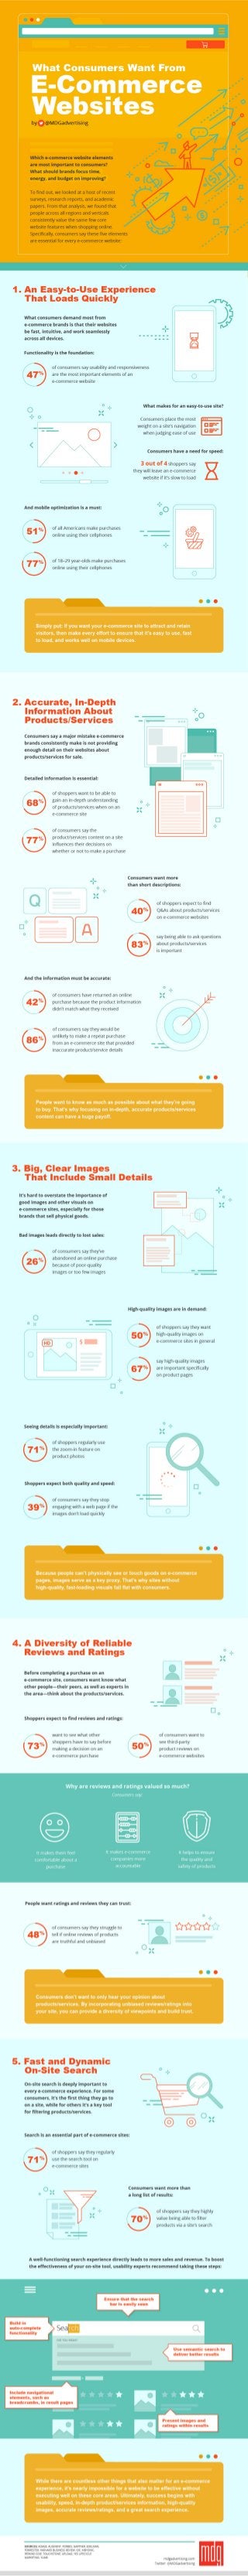 What Consumers Want from E-Commerce Websites [Infographic]